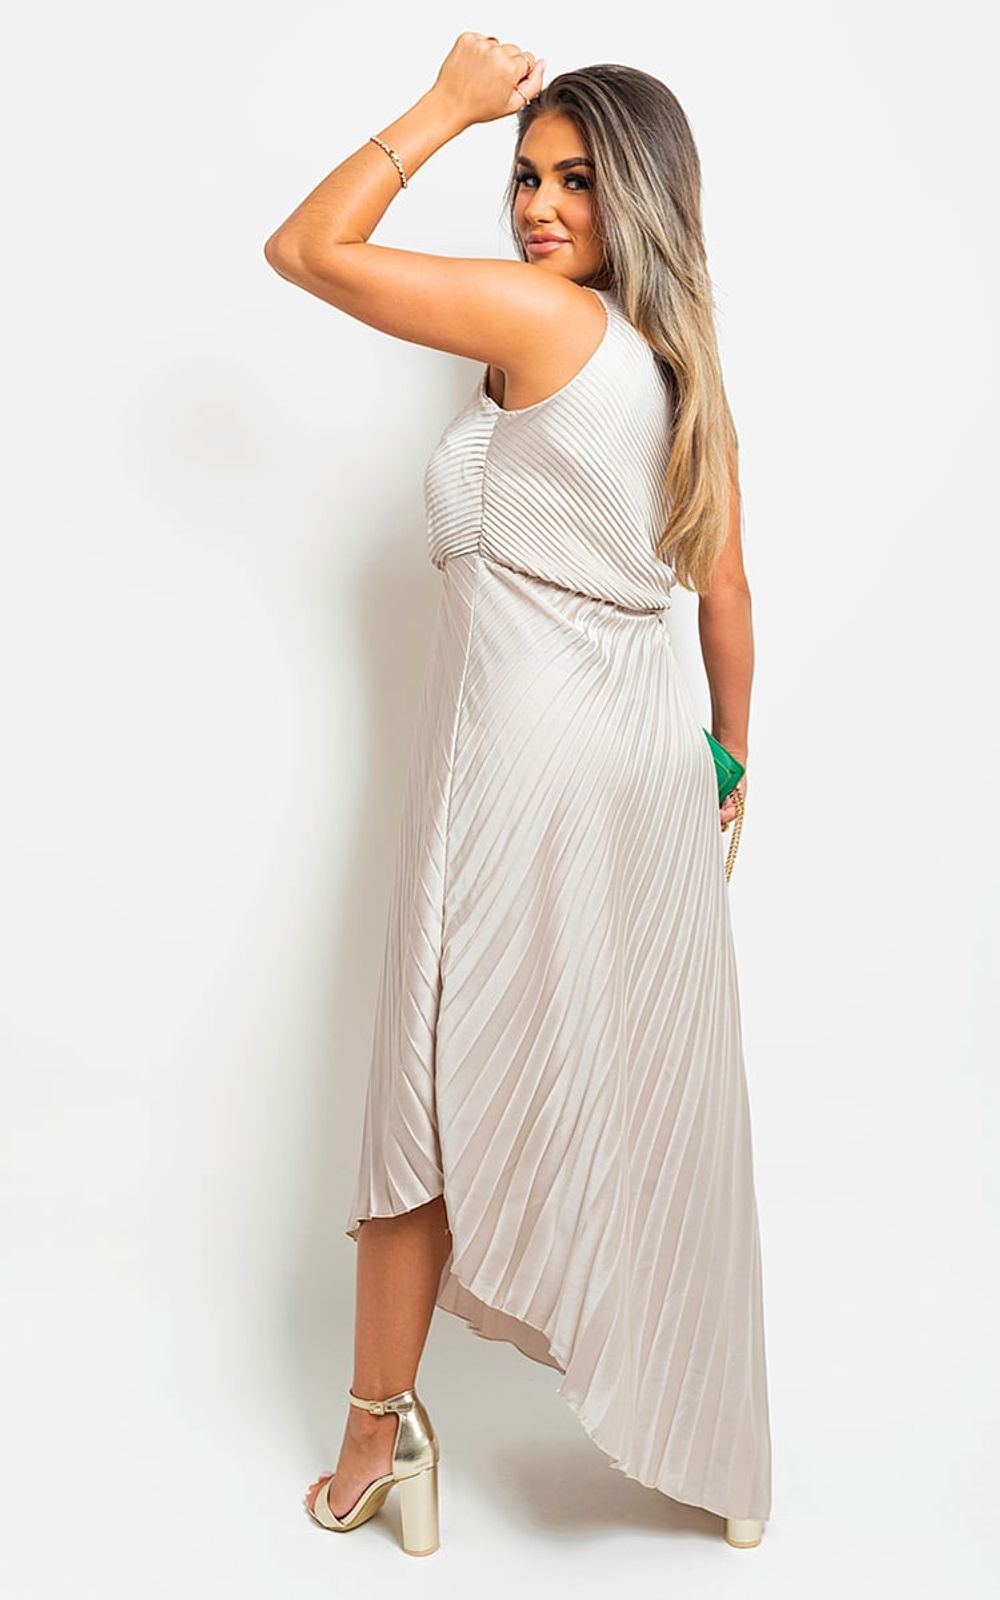 Women's Pleated Party Dress